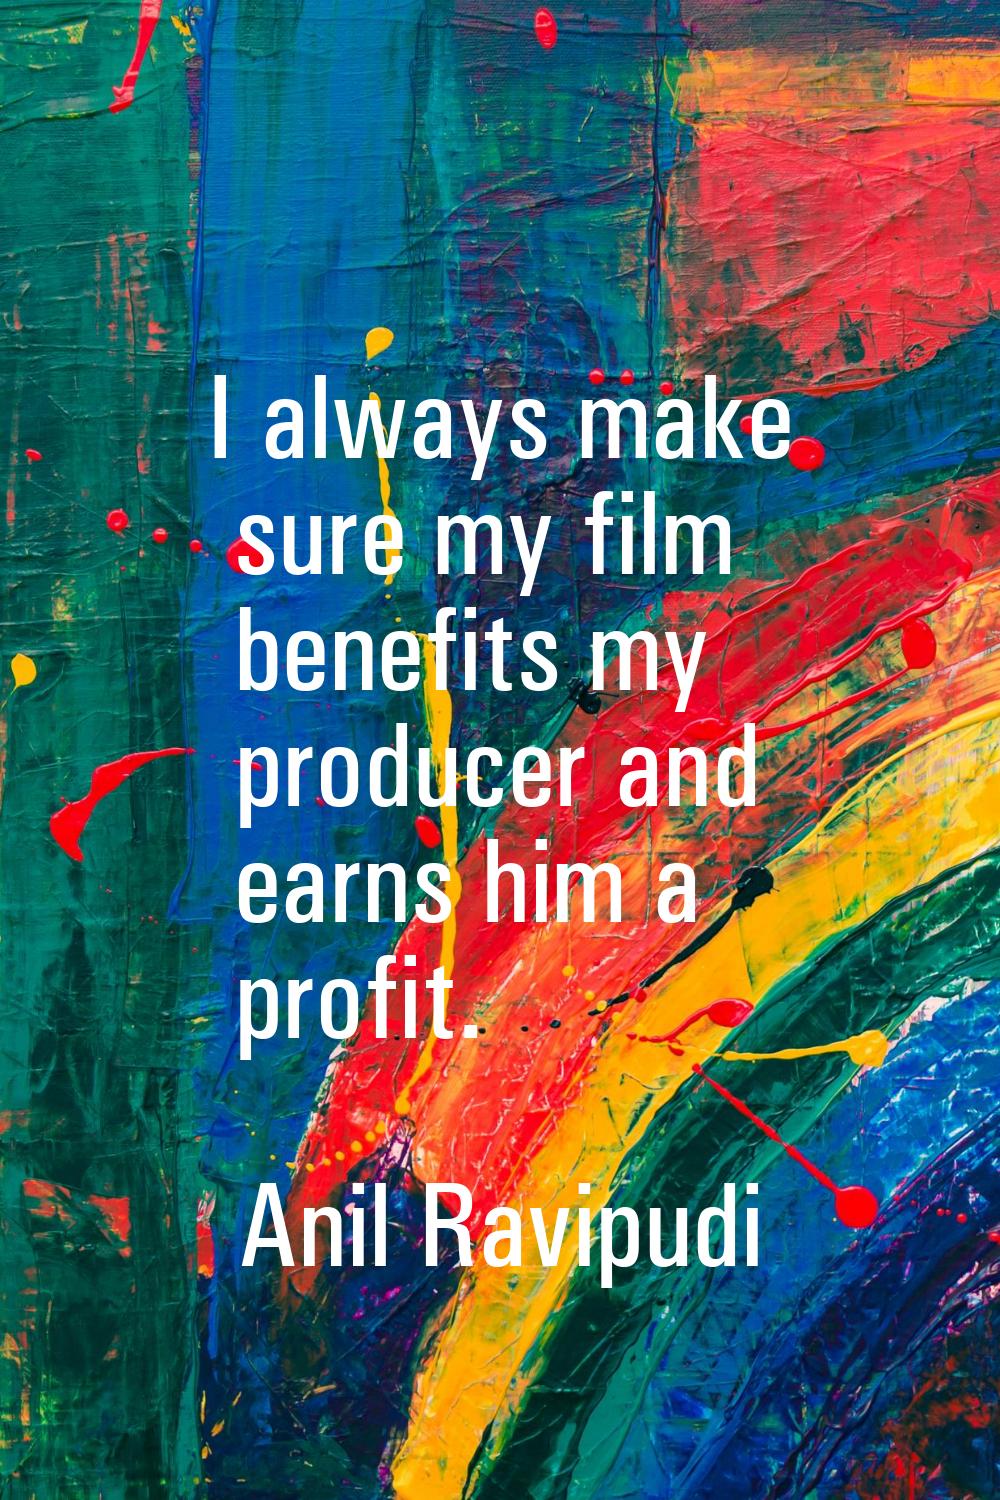 I always make sure my film benefits my producer and earns him a profit.